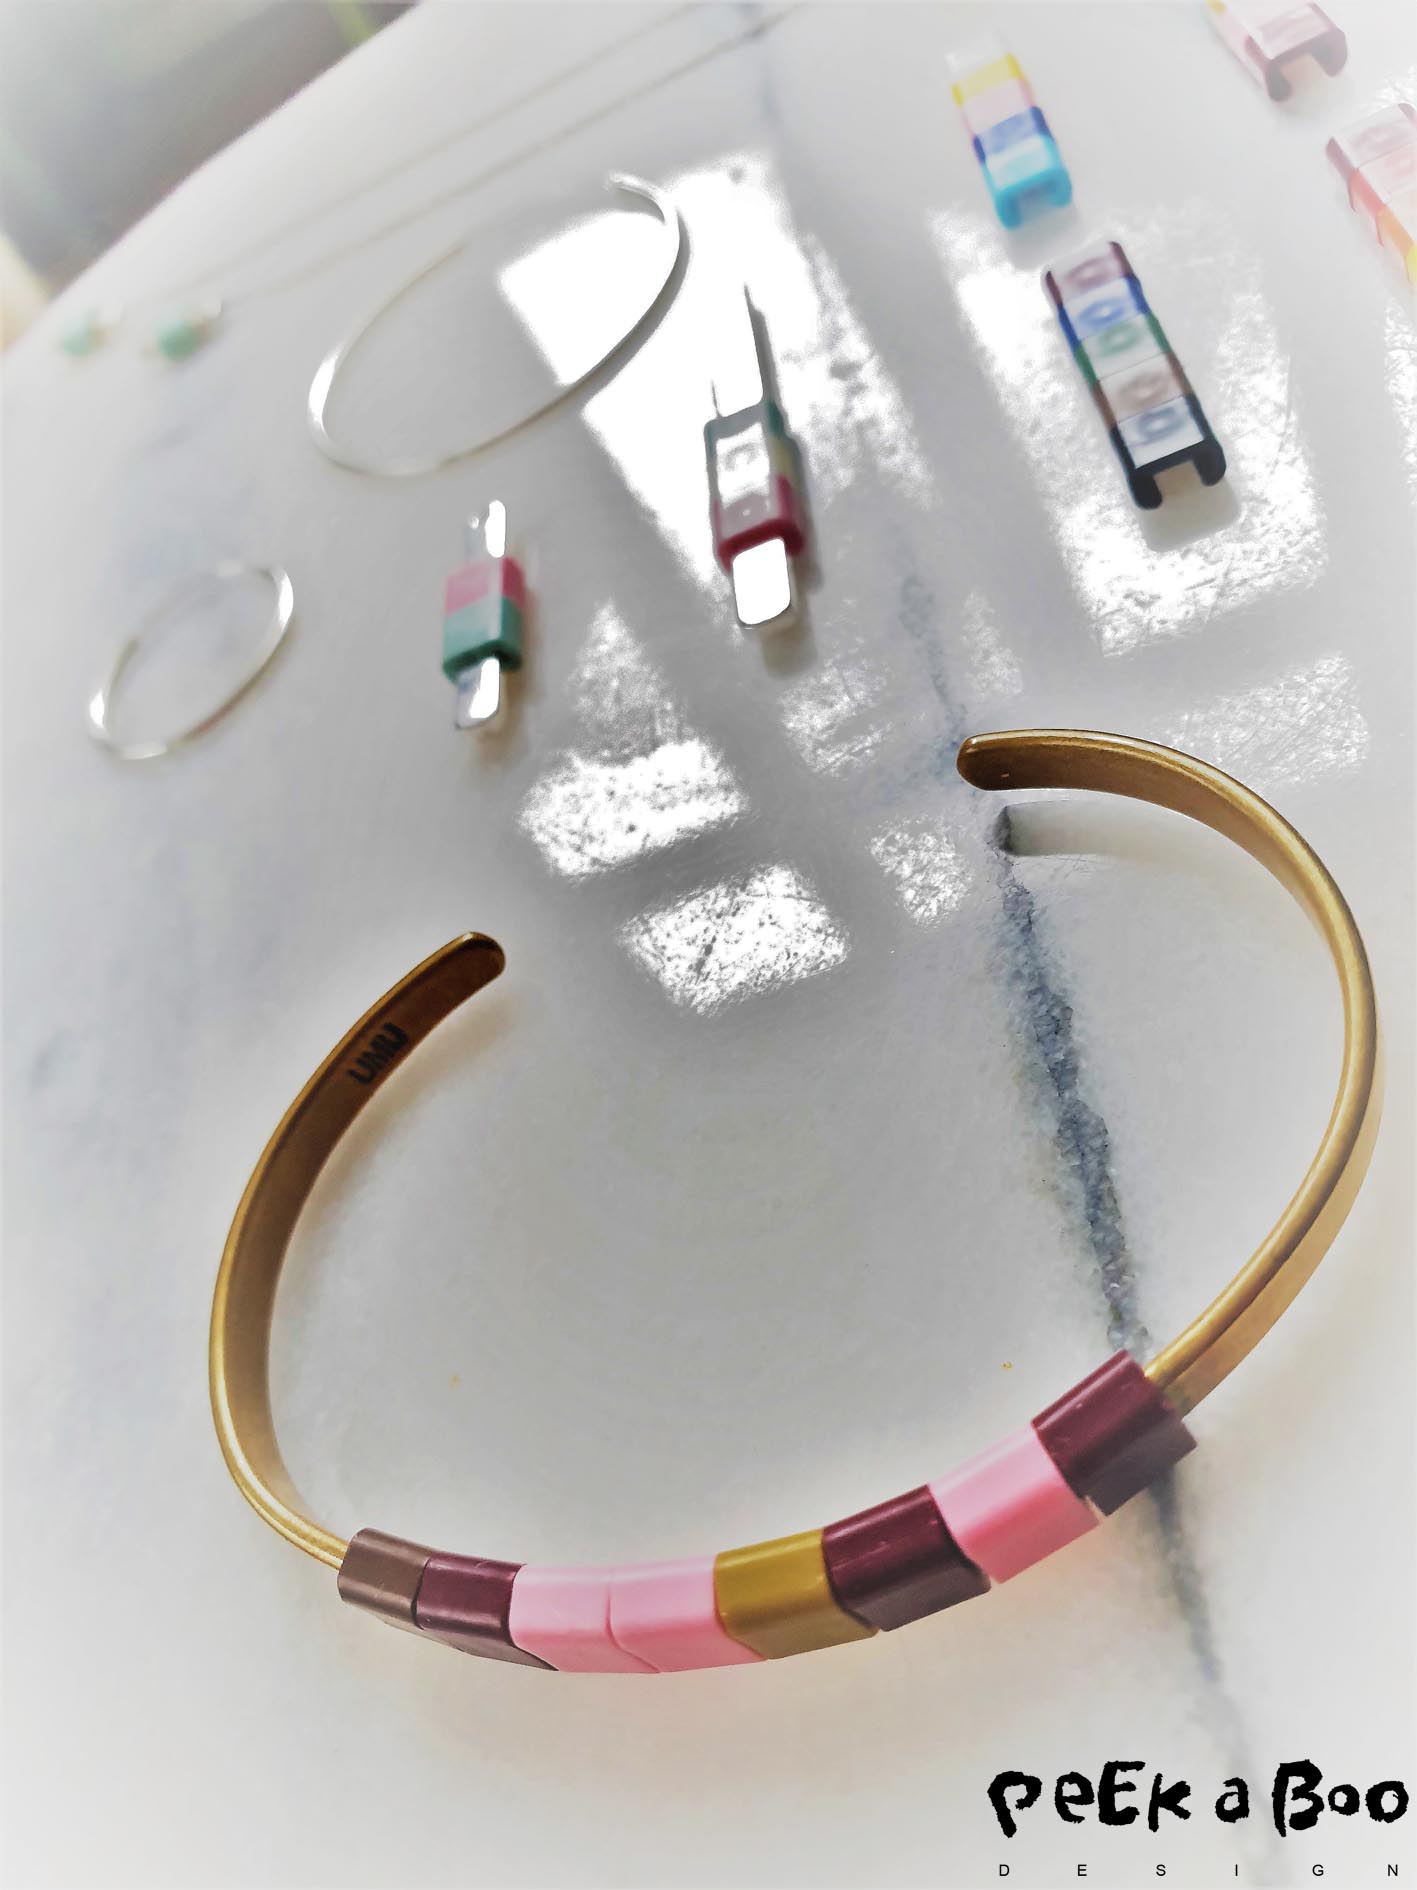 My alltime favorite bangles...and colour combo at the moment...from usmeus design.